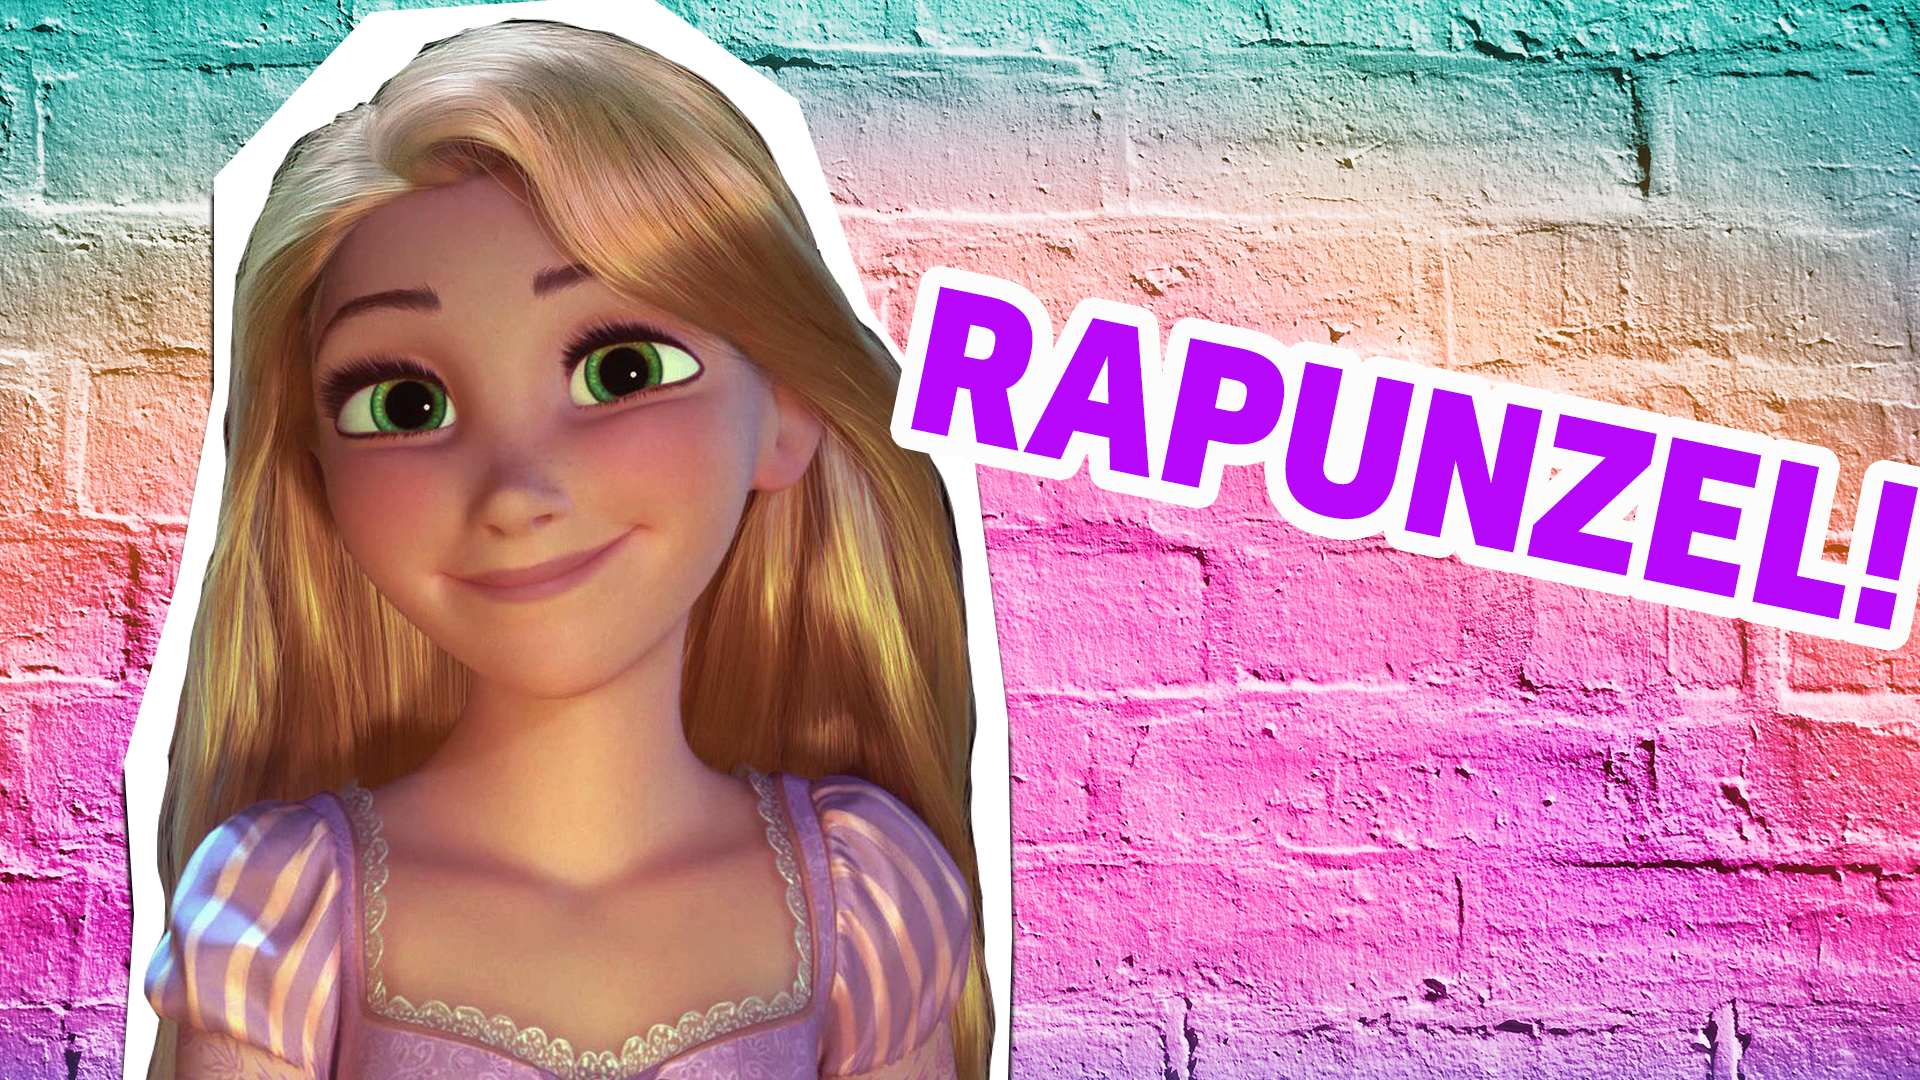 You're just like Rapunzel! You yearn for adventure and you love learning new things! You'd do anything to see the world!